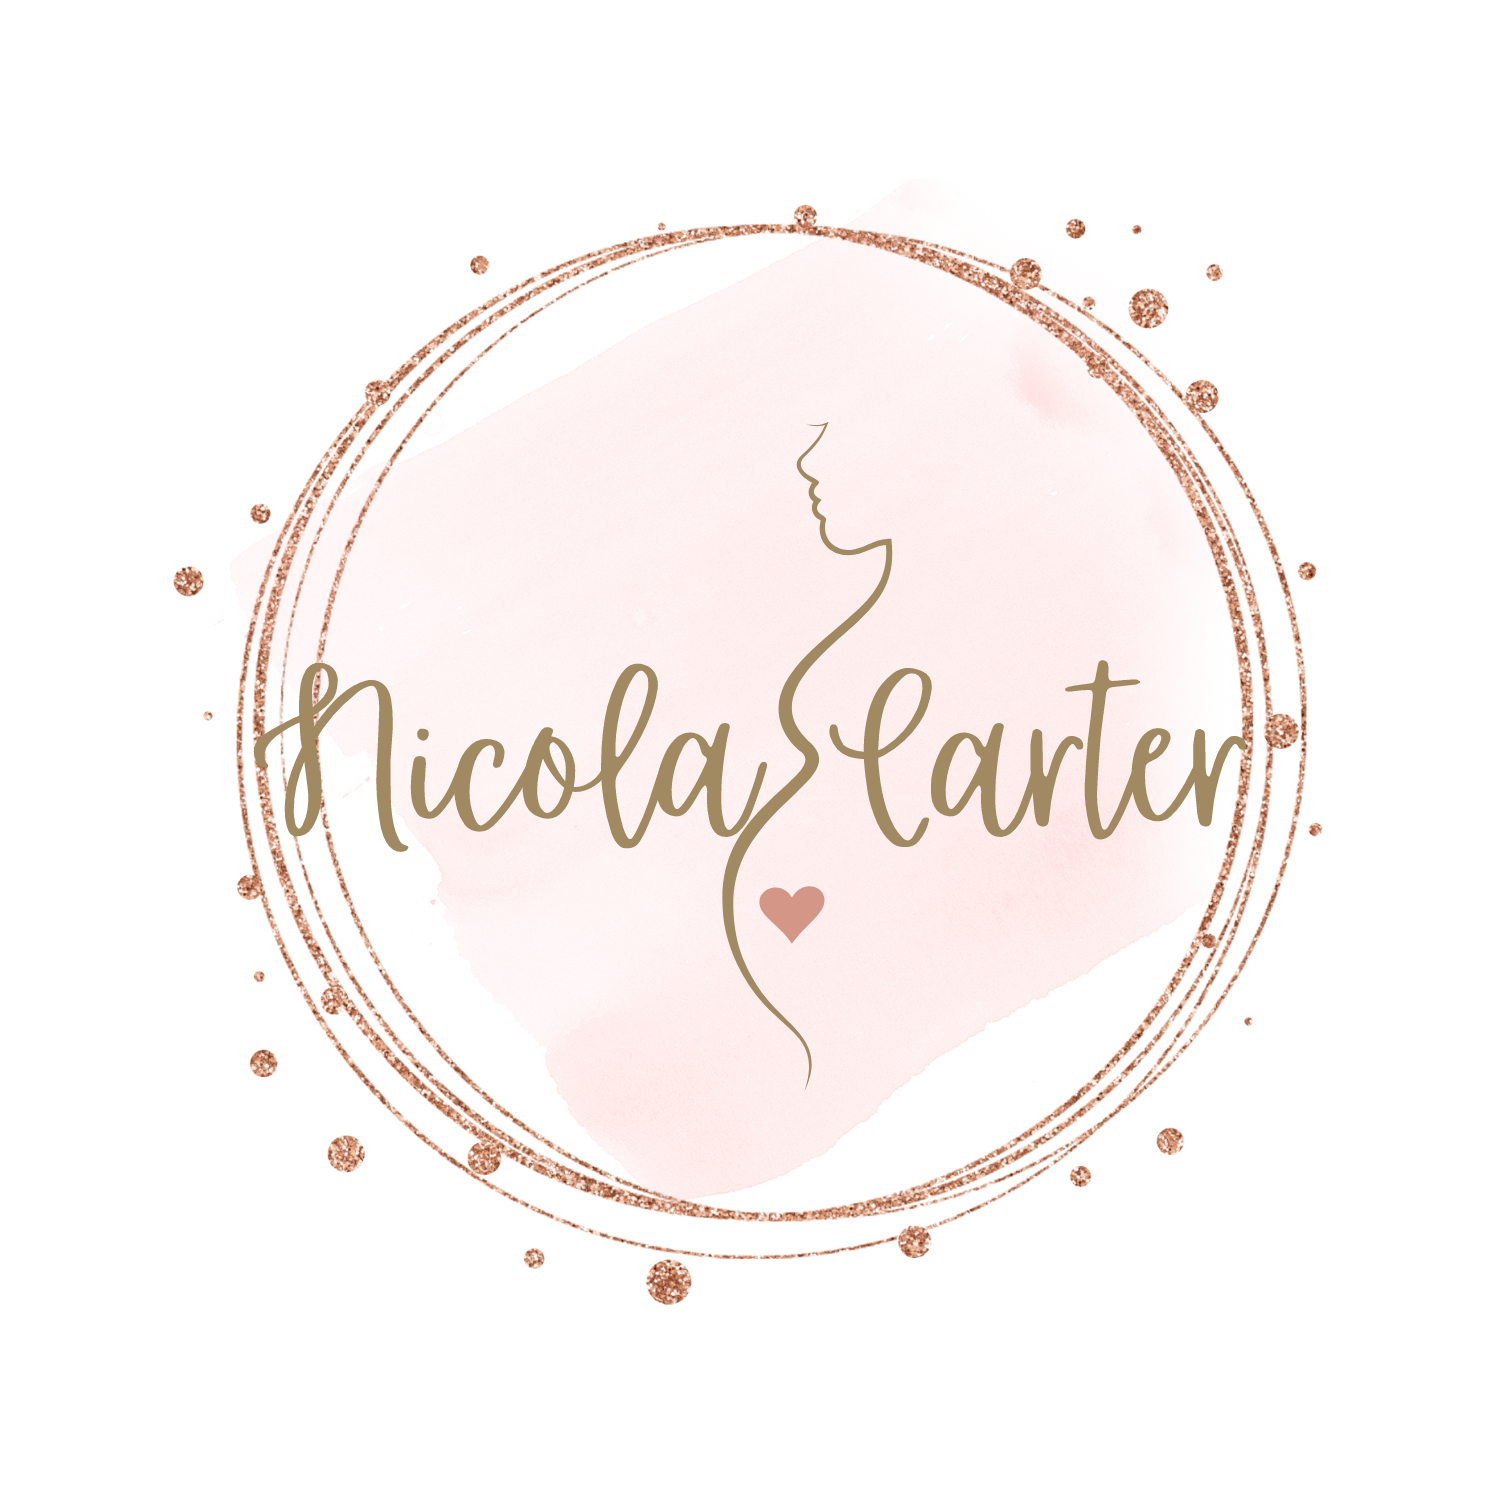 doula logo for Nicola Carter, doula and hypnobirthing teacher in Nottingham and Derby